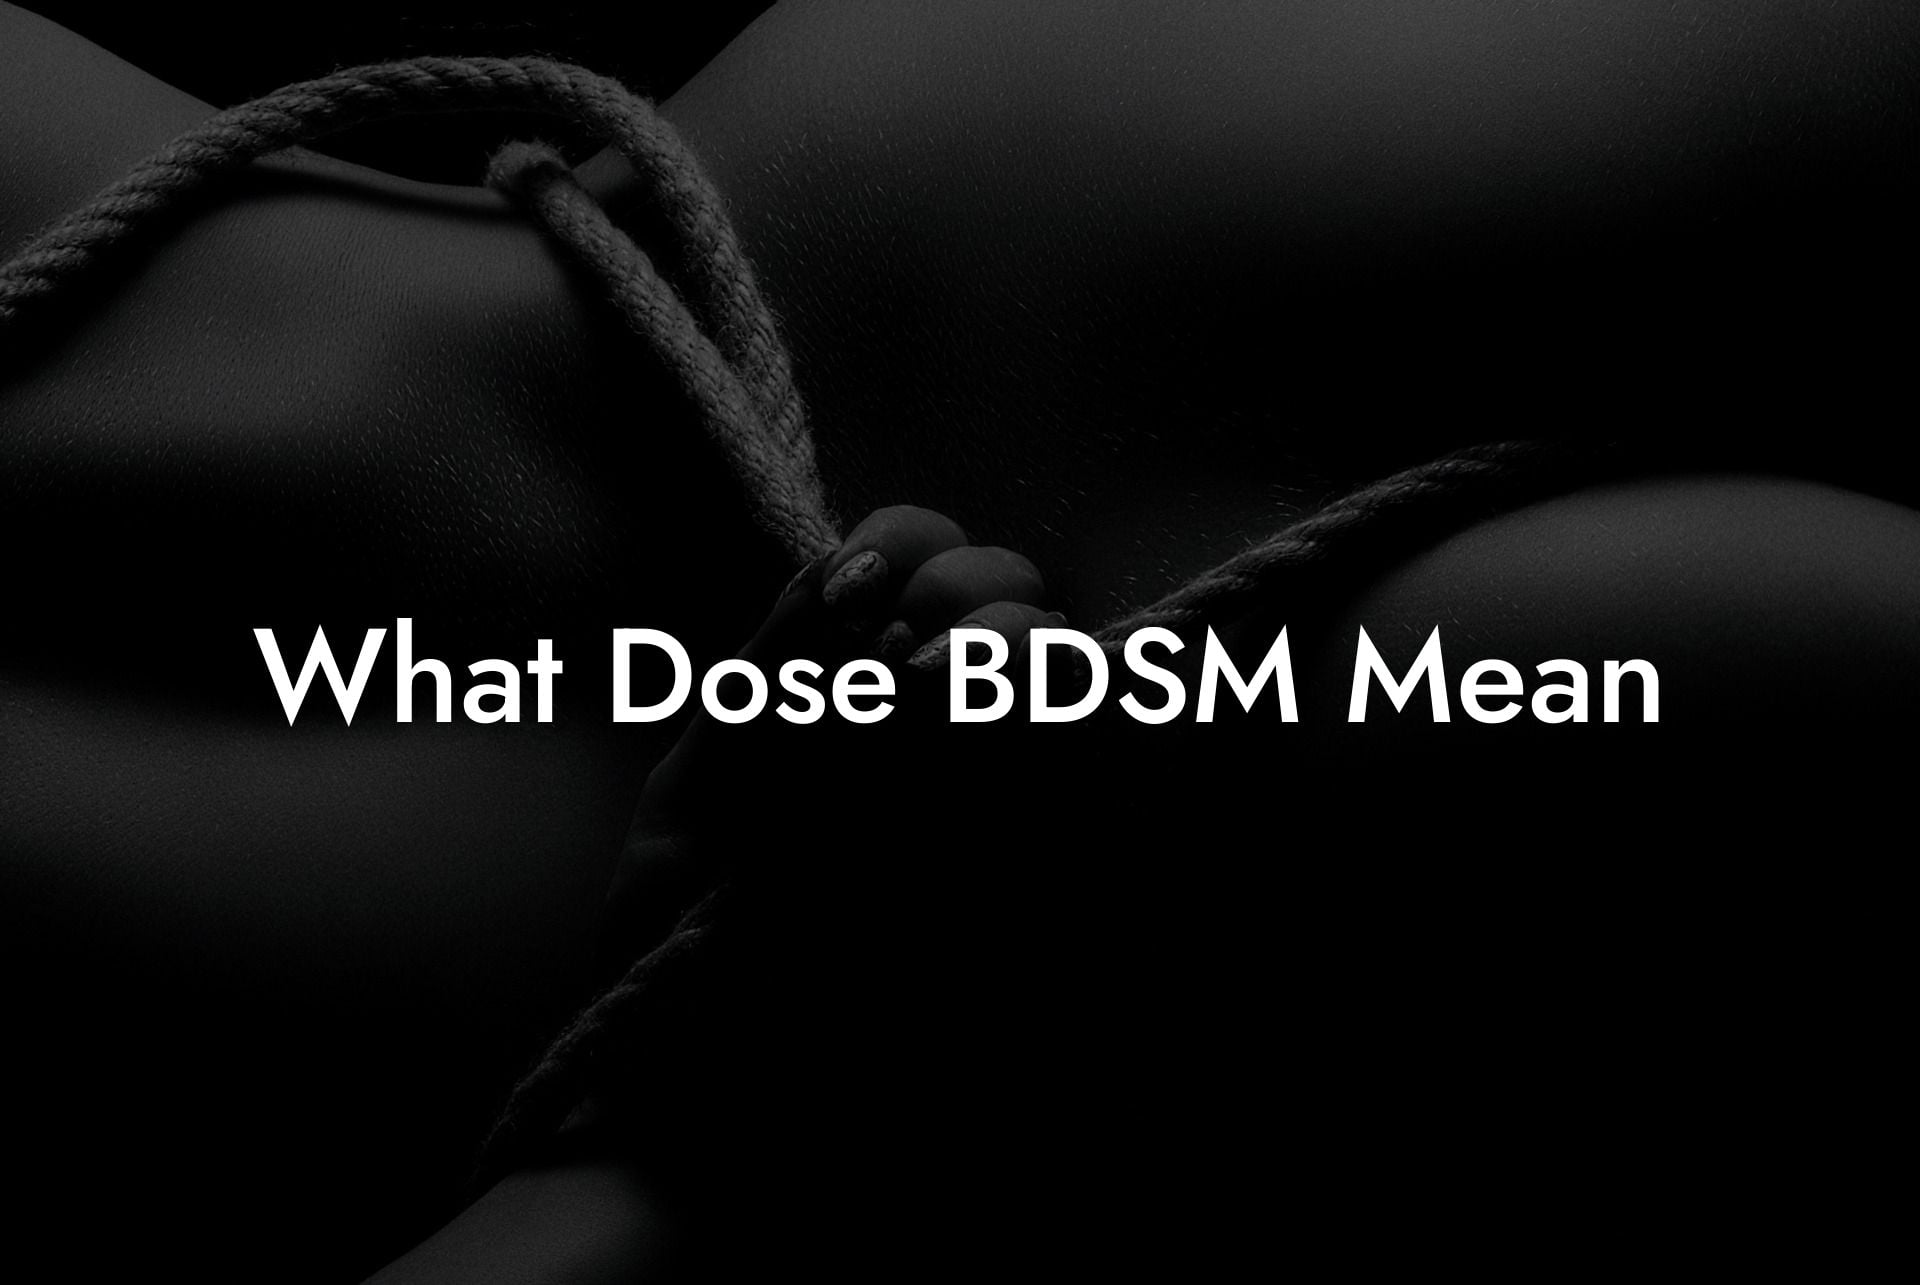 What Dose BDSM Mean